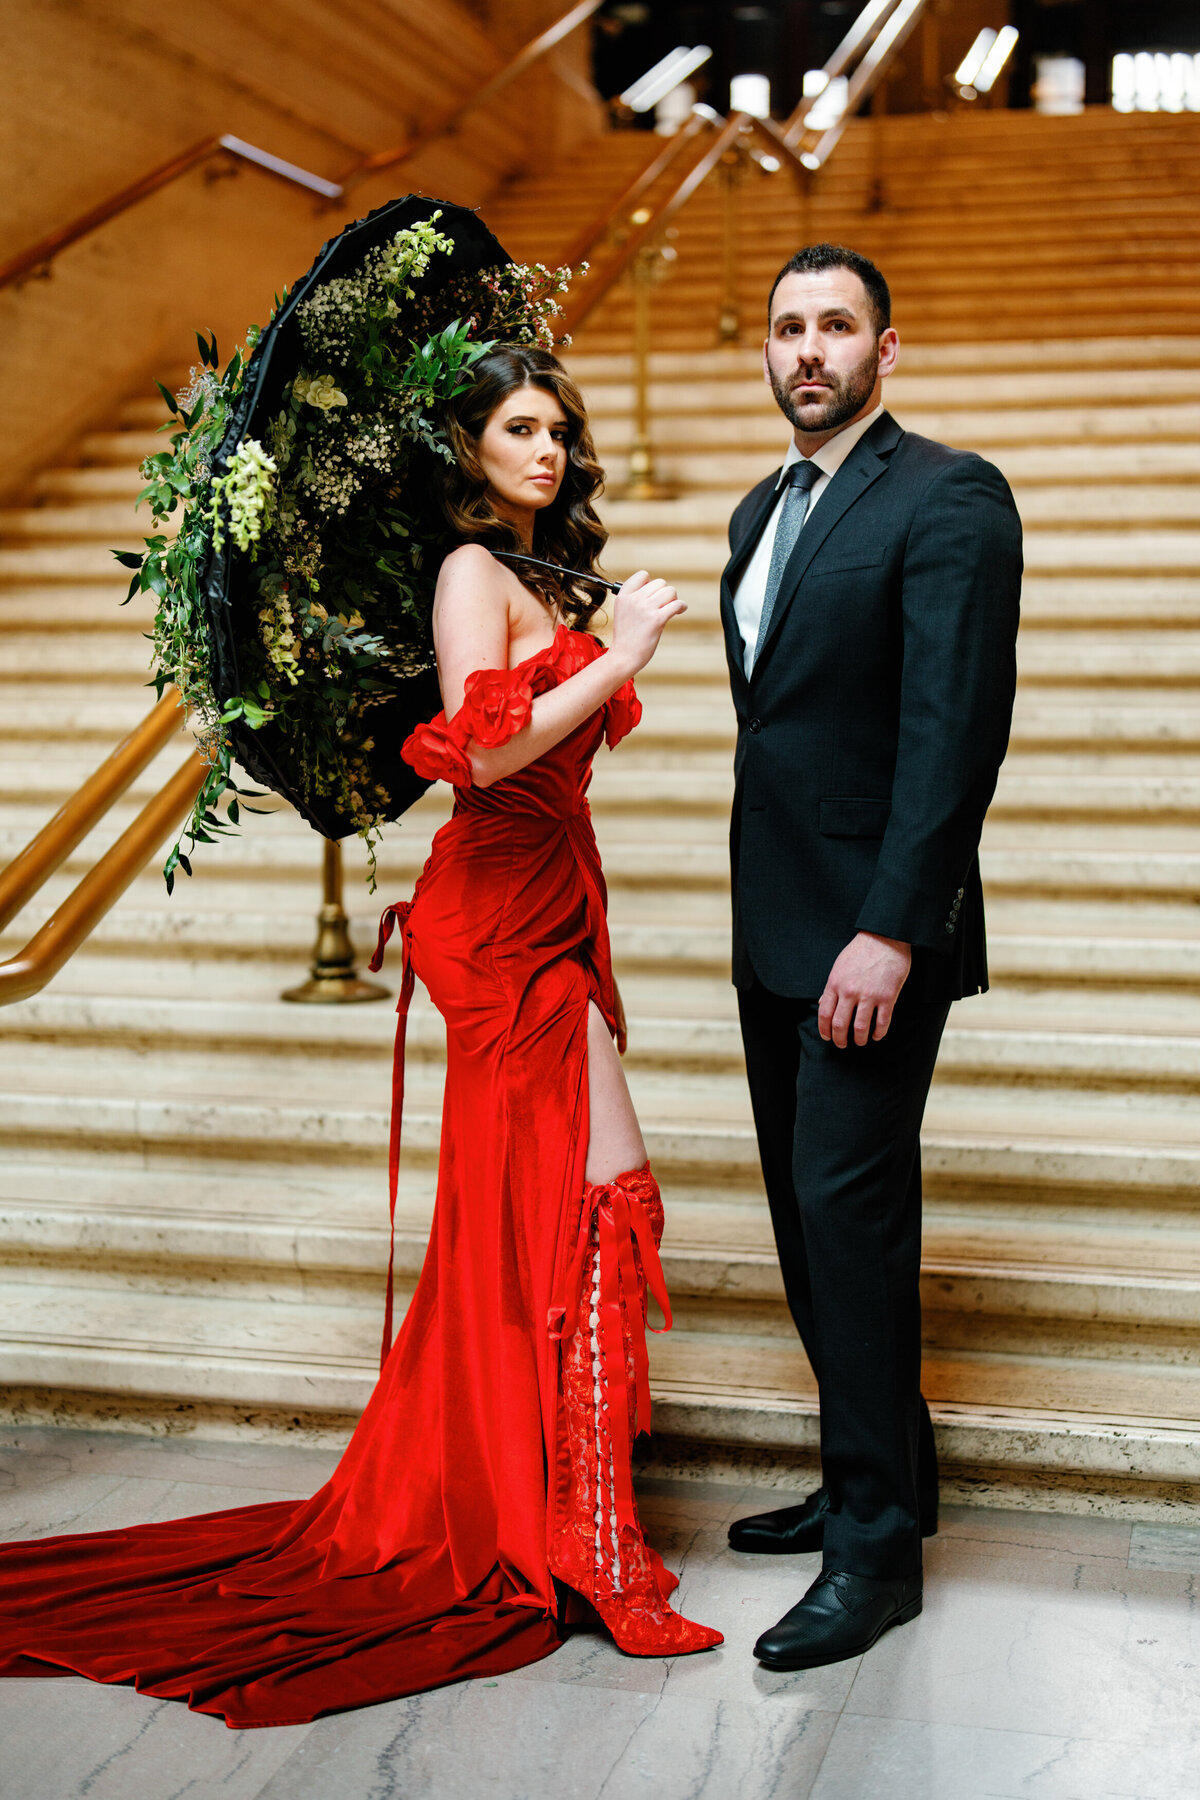 Aspen-Avenue-Chicago-Wedding-Photographer-Union-Station-Chicago-Theater-Engagement-Session-Timeless-Romantic-Red-Dress-Editorial-Stemming-From-Love-Bry-Jean-Artistry-The-Bridal-Collective-True-to-color-Luxury-FAV-1